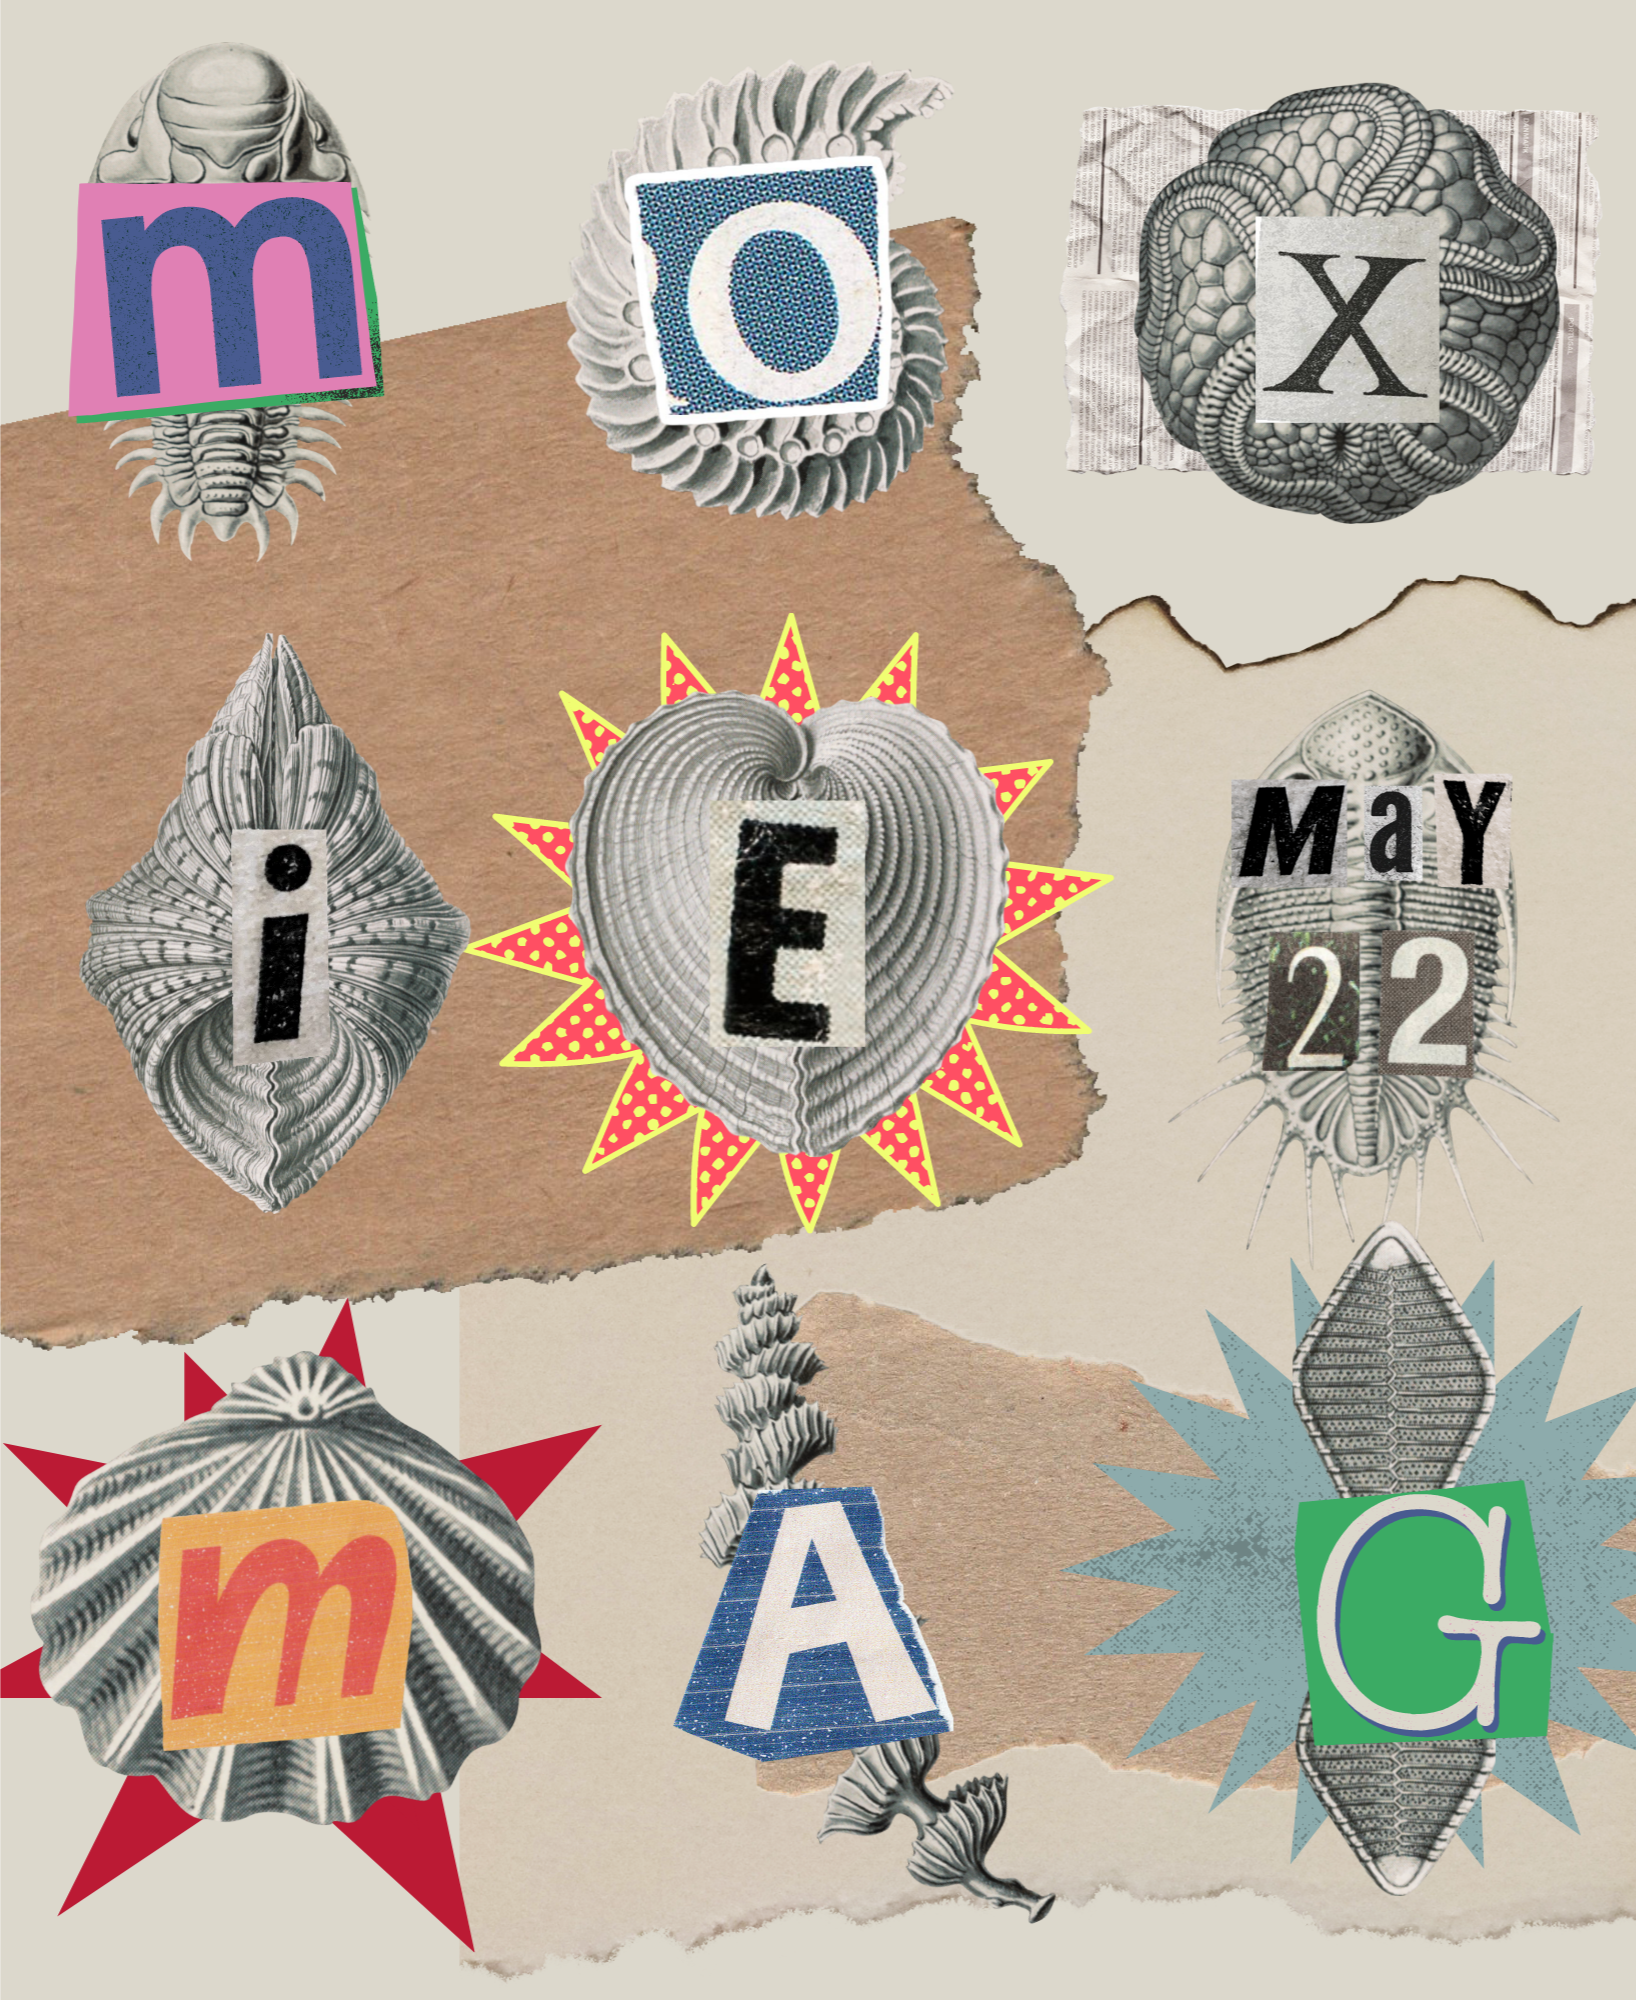 May cover of MoxieMag that looks like it was made through a collage technique. Each letter of “MoxieMag” looks like it's a magazine clipping, and each letter is overlaid on various objects that look like they were pulled from the ocean. 